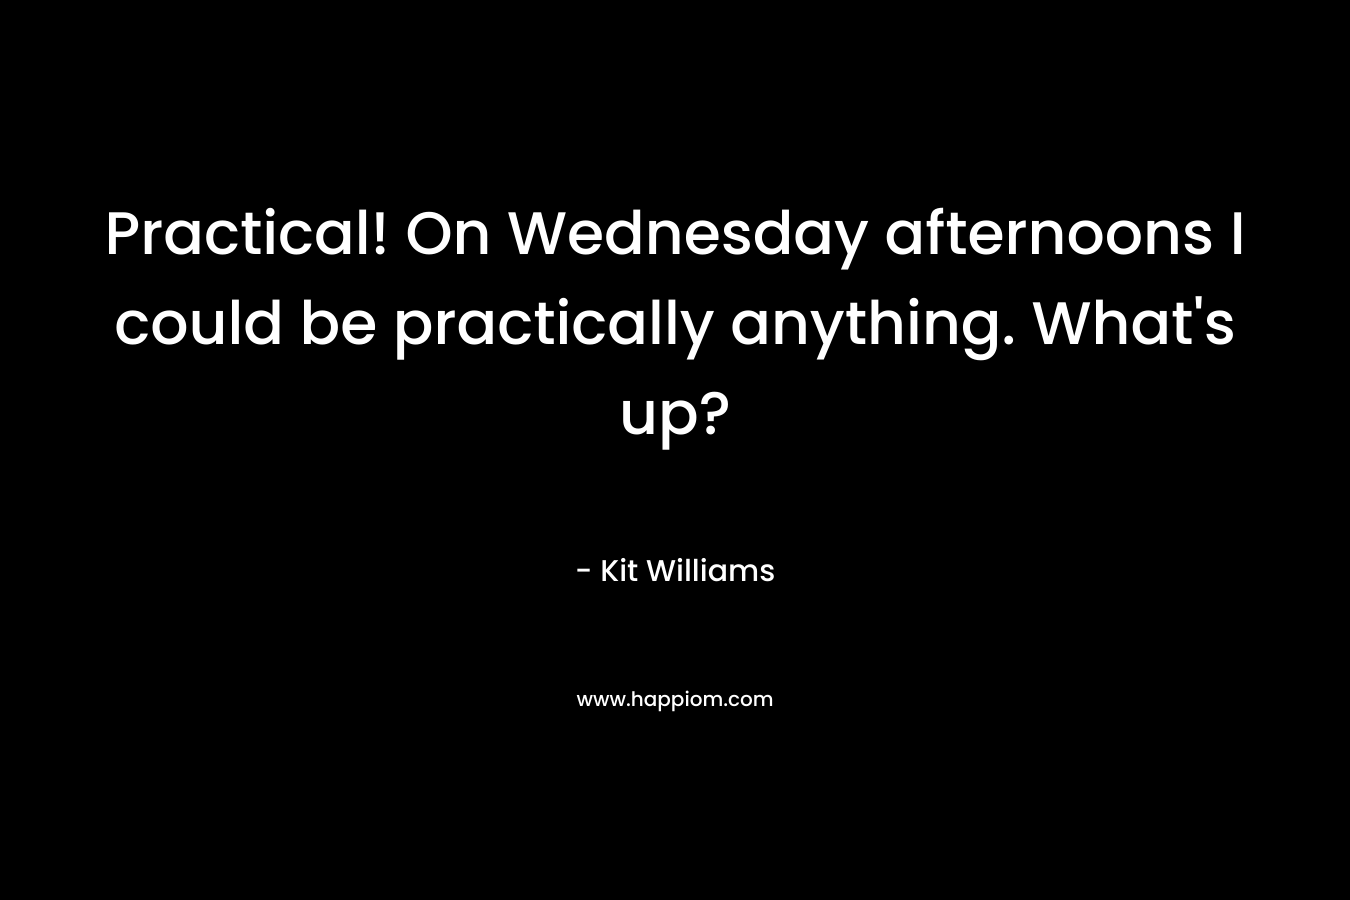 Practical! On Wednesday afternoons I could be practically anything. What’s up? – Kit Williams